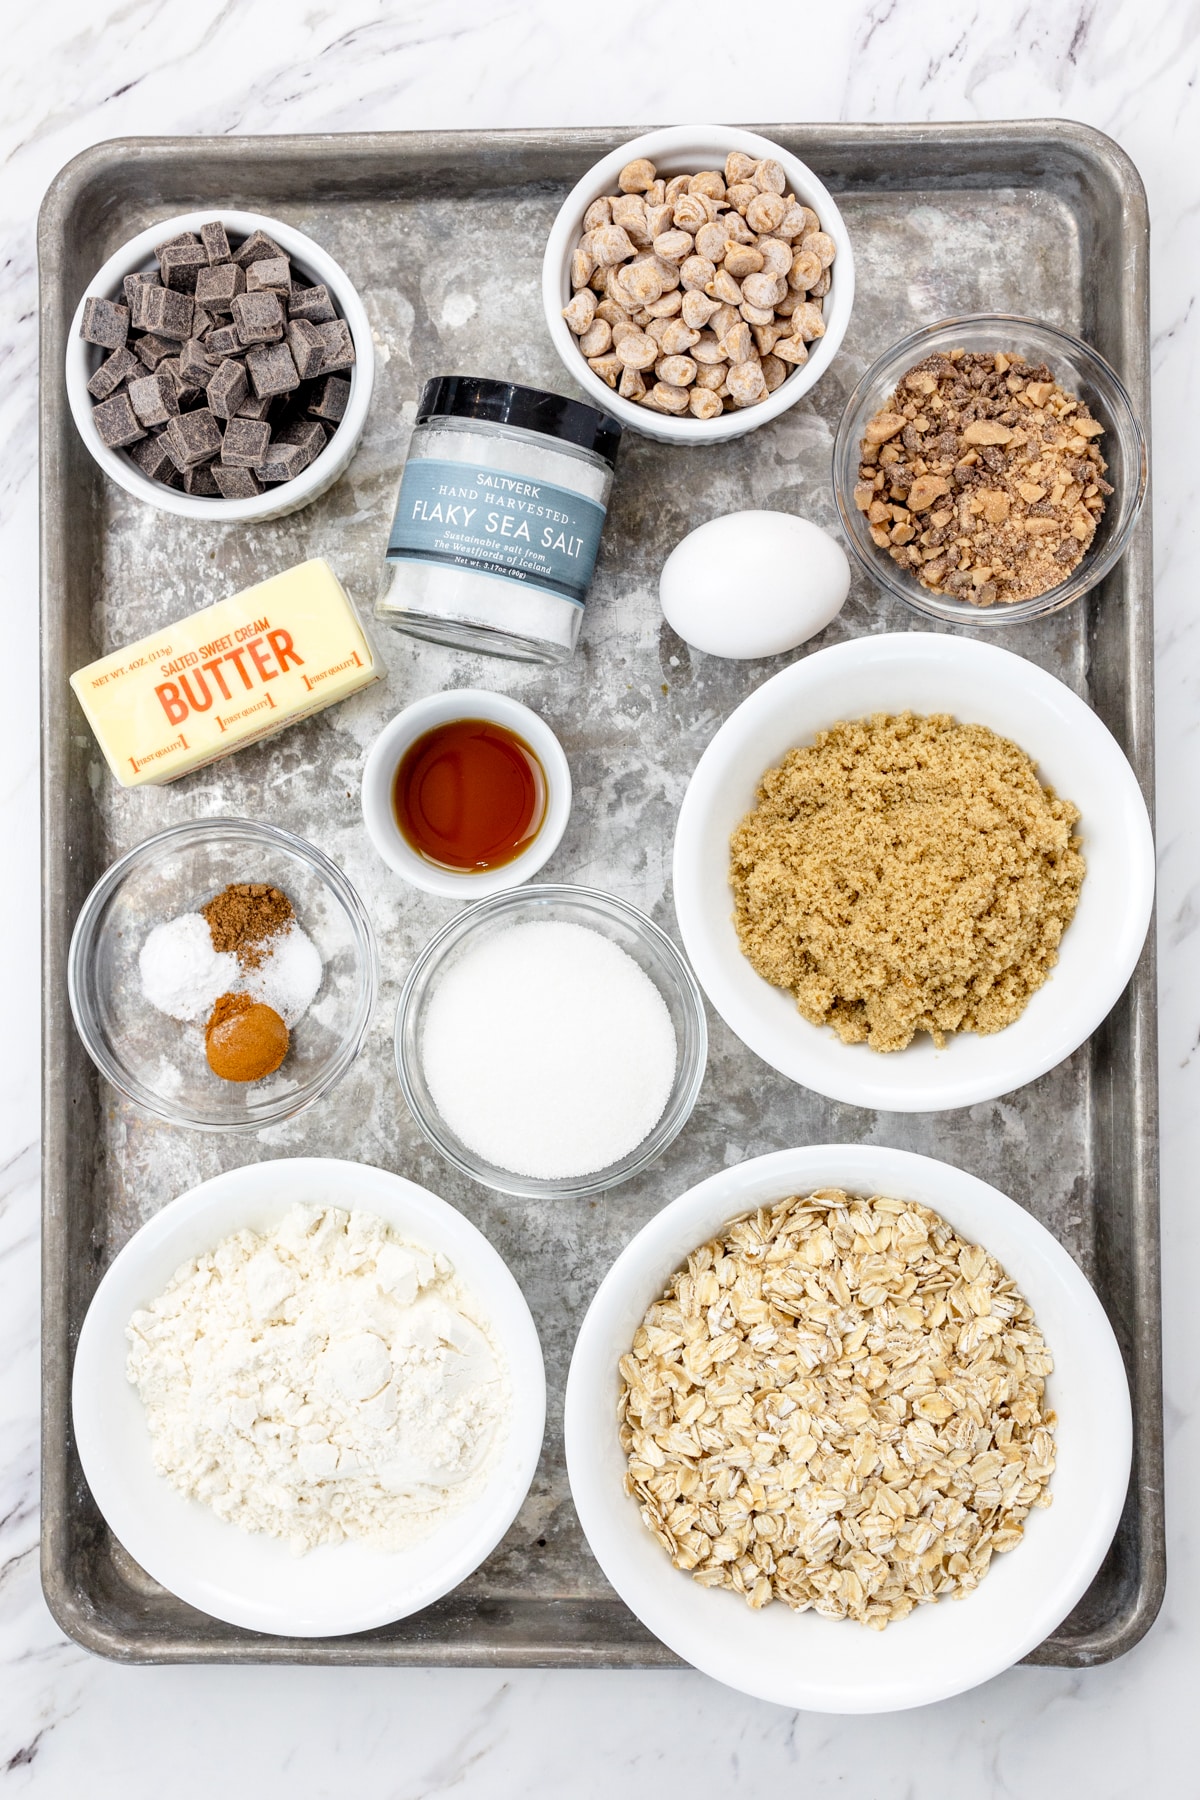 Top view of ingredients needed to make Mom's Recipe Cookies in small bowls on a tray.